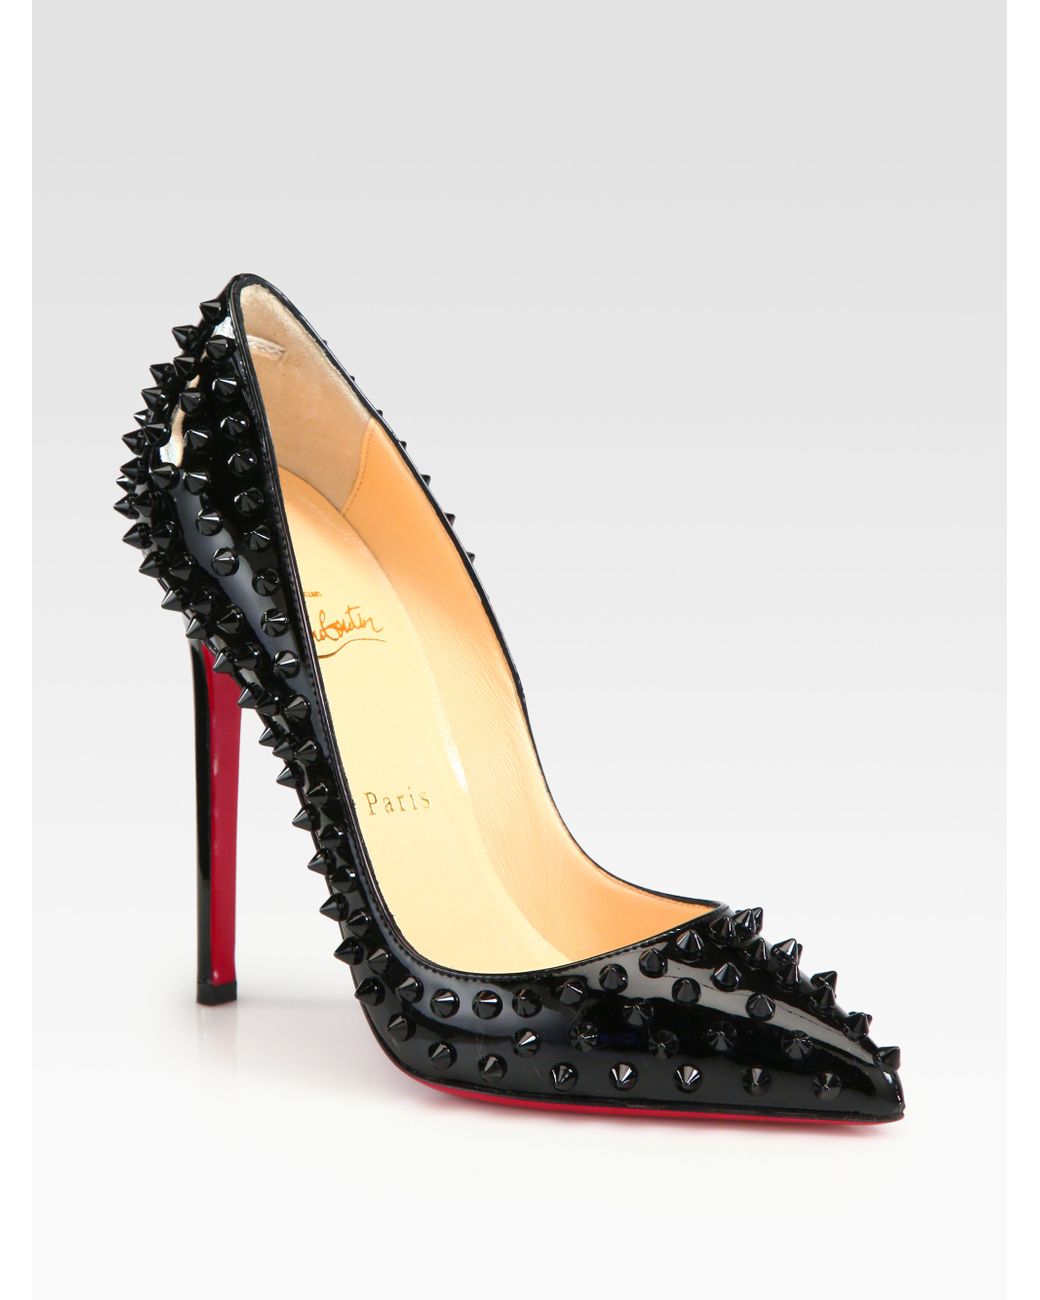 Christian Louboutin Pigalle 120m Spikes Patent Leather Pumps in Black | Lyst